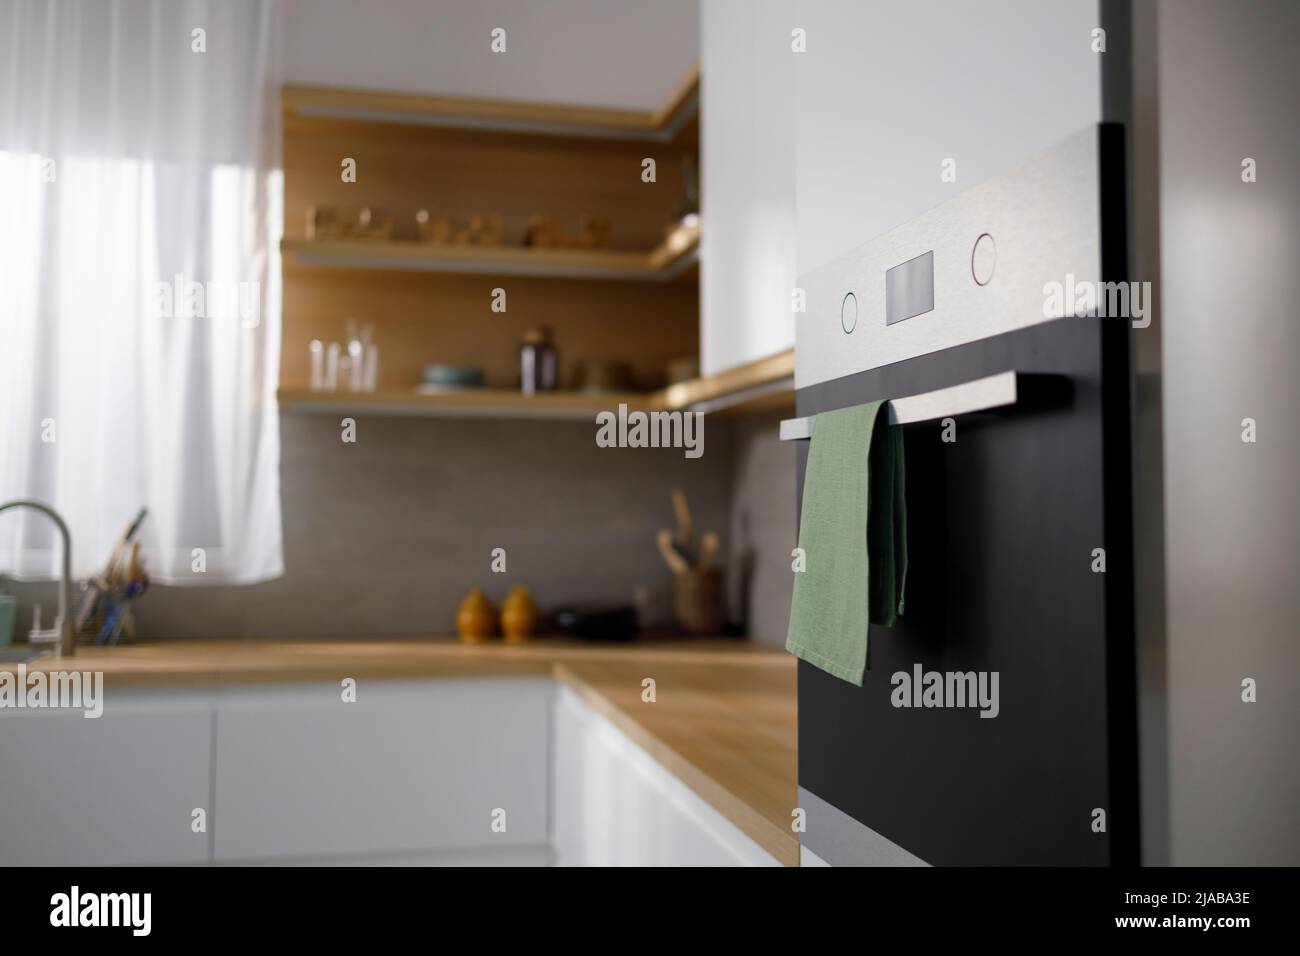 Modern kitchen interior with built-in oven Stock Photo